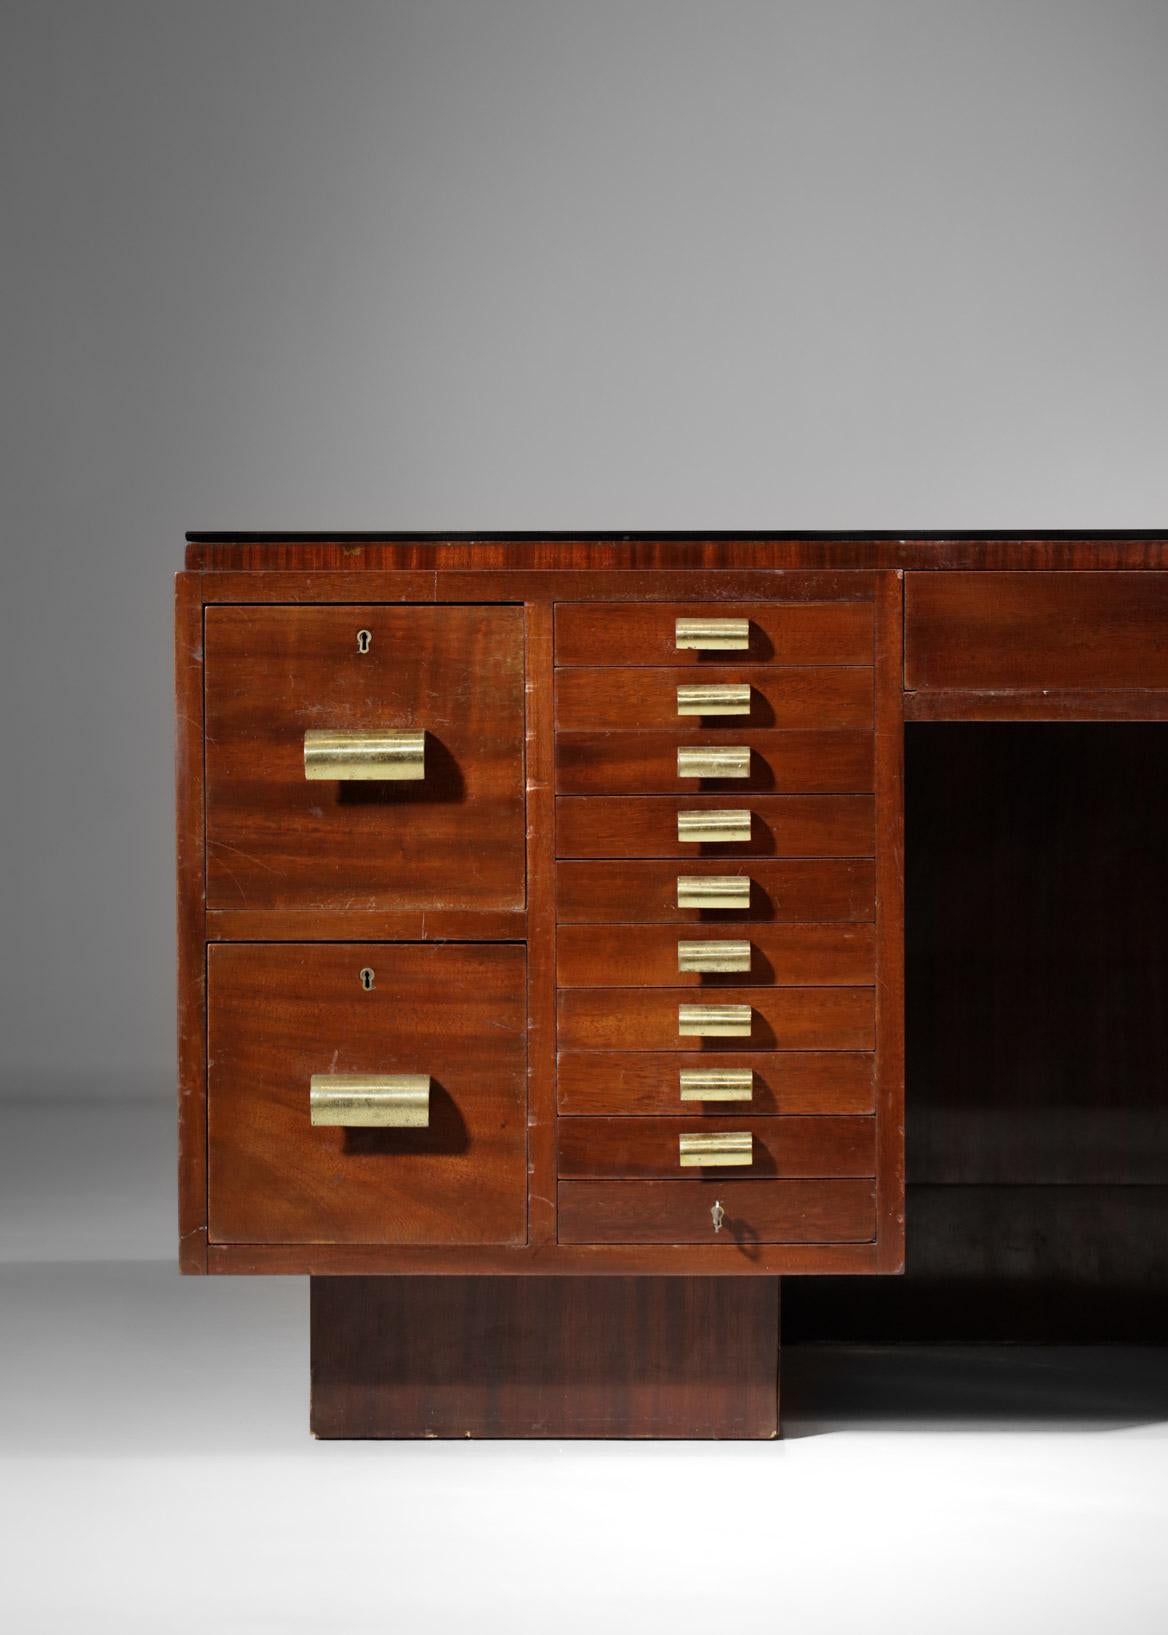 Imposing 1940's French Modernist Desk in Mahogany in Style of Dupré Lafon, E498 For Sale 9